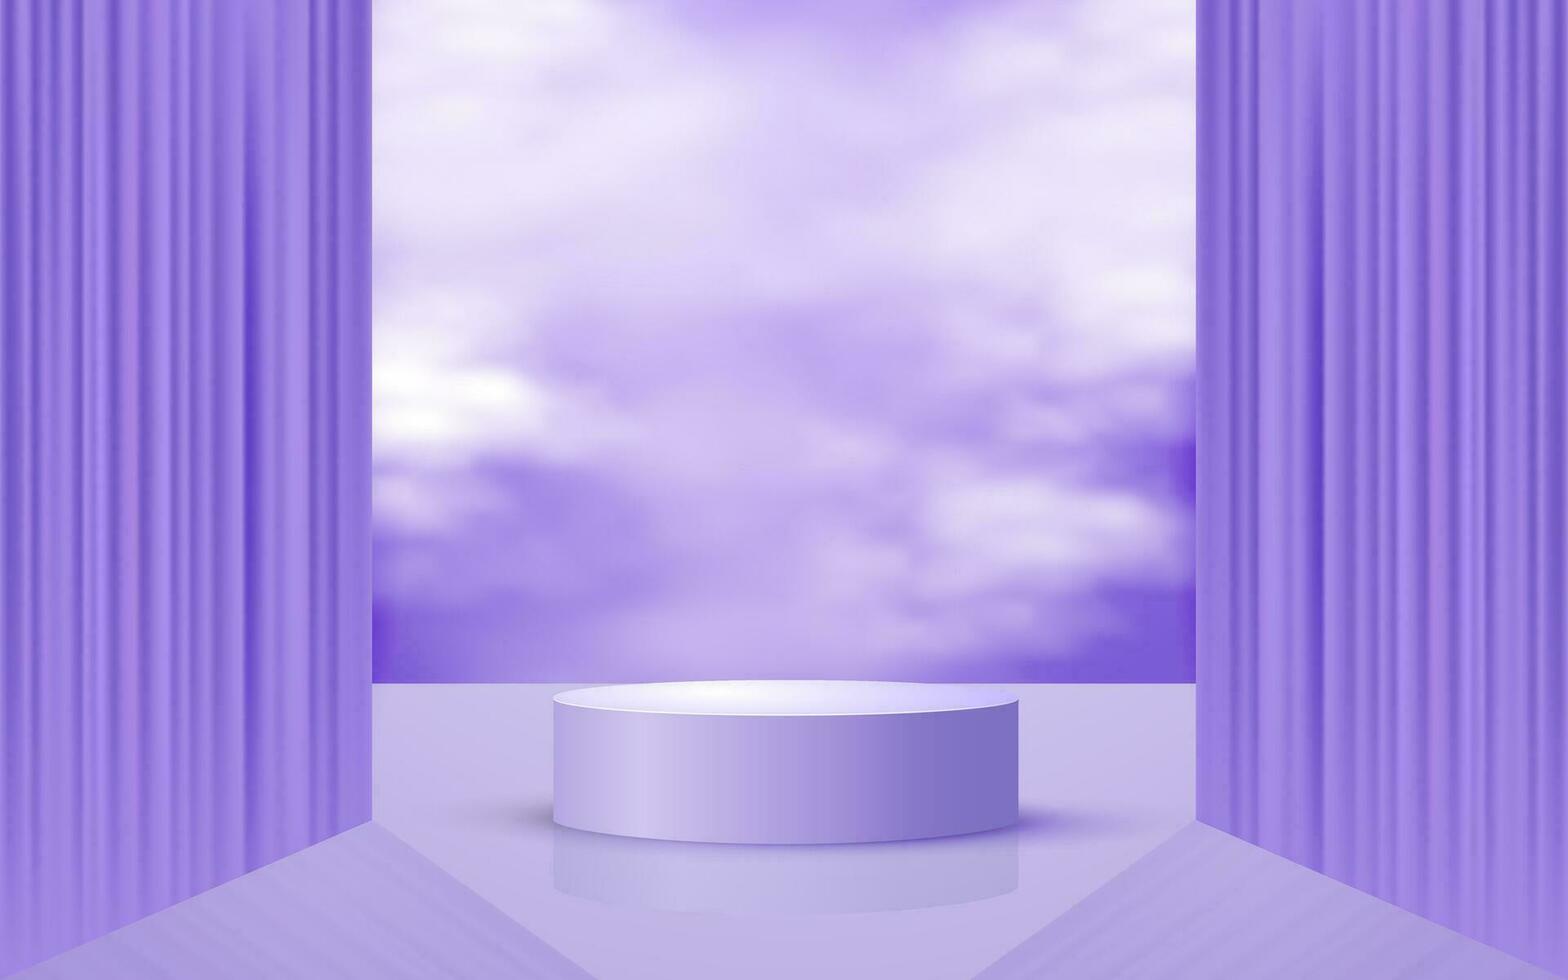 Pastel purple round 3d scene podium with clouds and curtains background perfect for event promotion cosmetic product presentation mockup vector